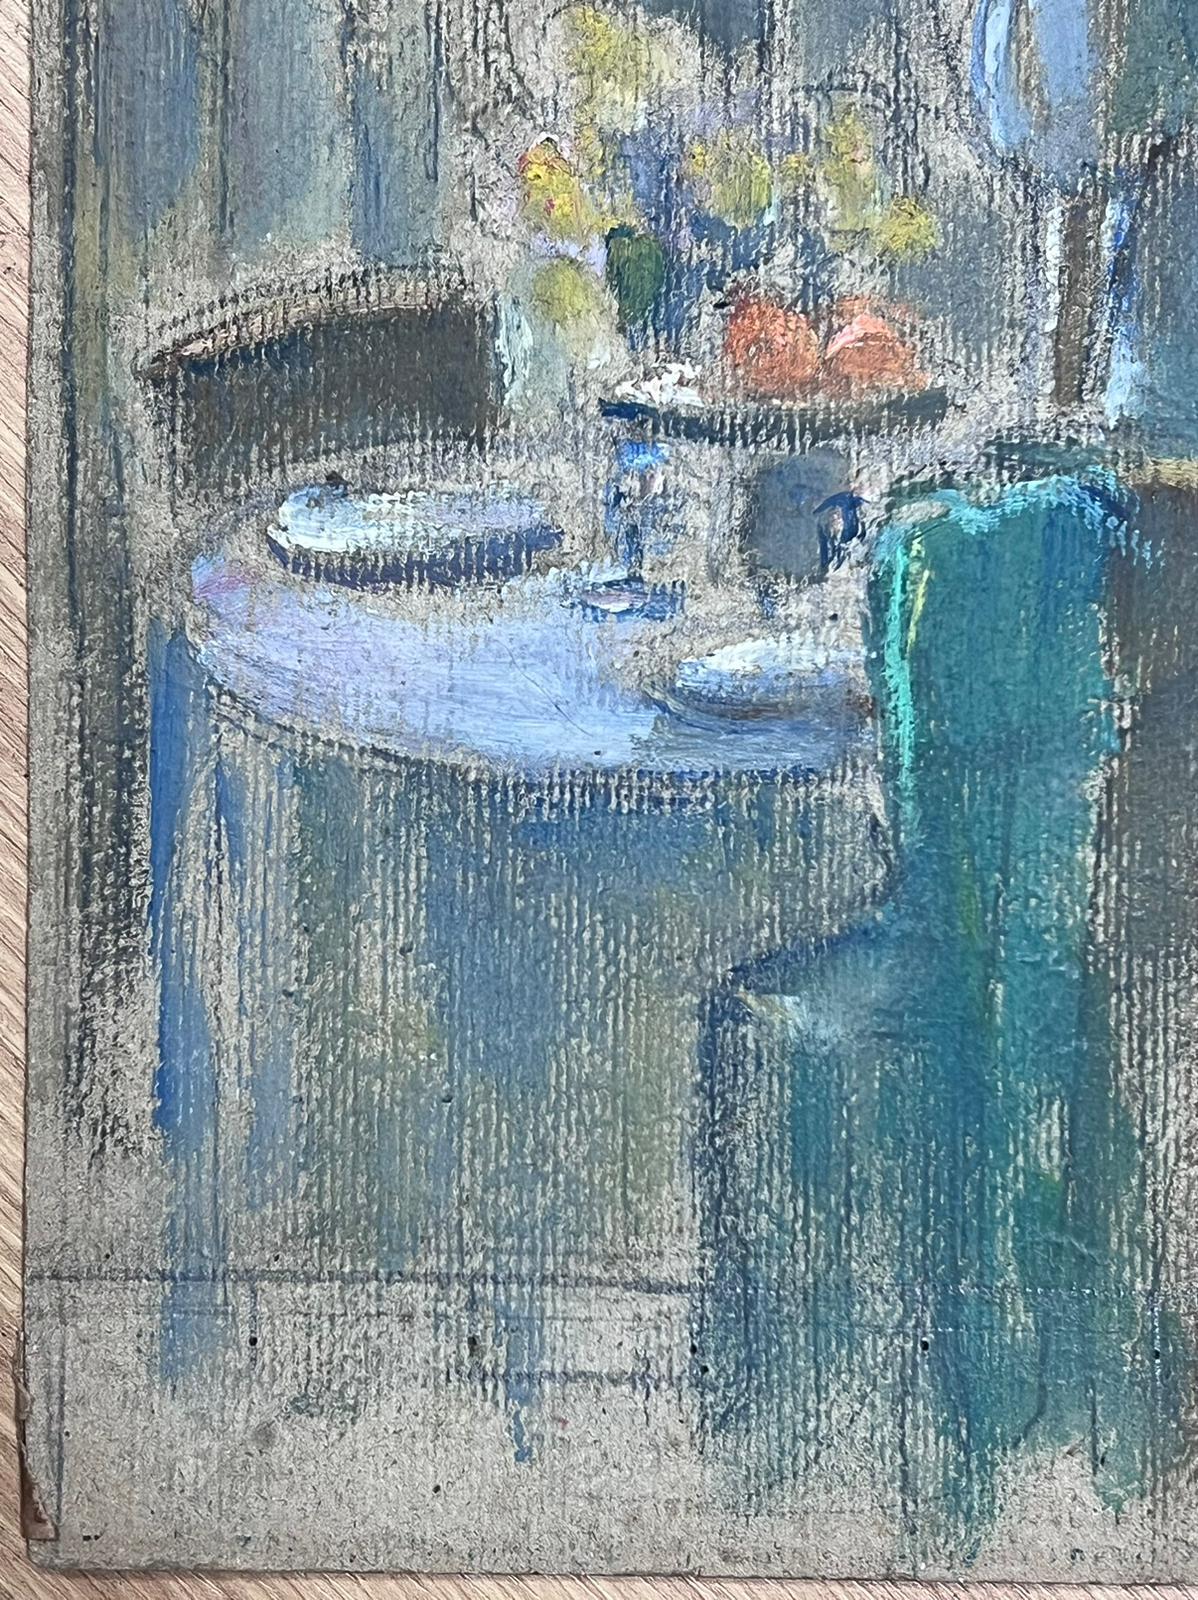 Vintage French Oil Painting 
by Louise Alix (French, 1888-1980) *see notes below
provenance stamp to the back 
oil painting on board, unframed
measures: 11 high by 8 inches wide
condition: overall very good and sound, a few scuffs and marks to the